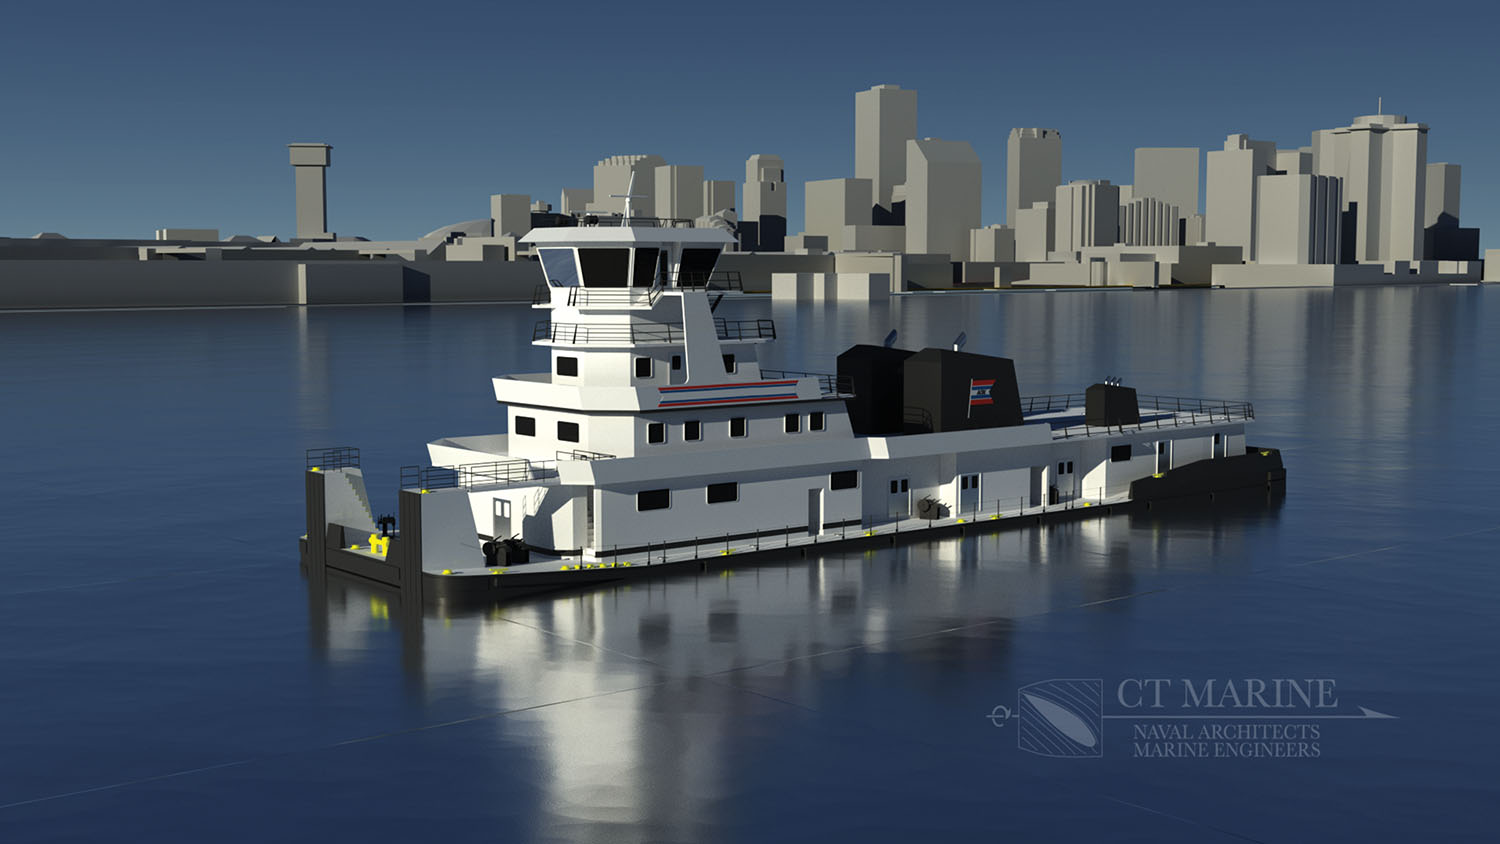 Twin-screw towboat was designed by CT Marine and will be powered by Caterpillar C280-12 diesels.